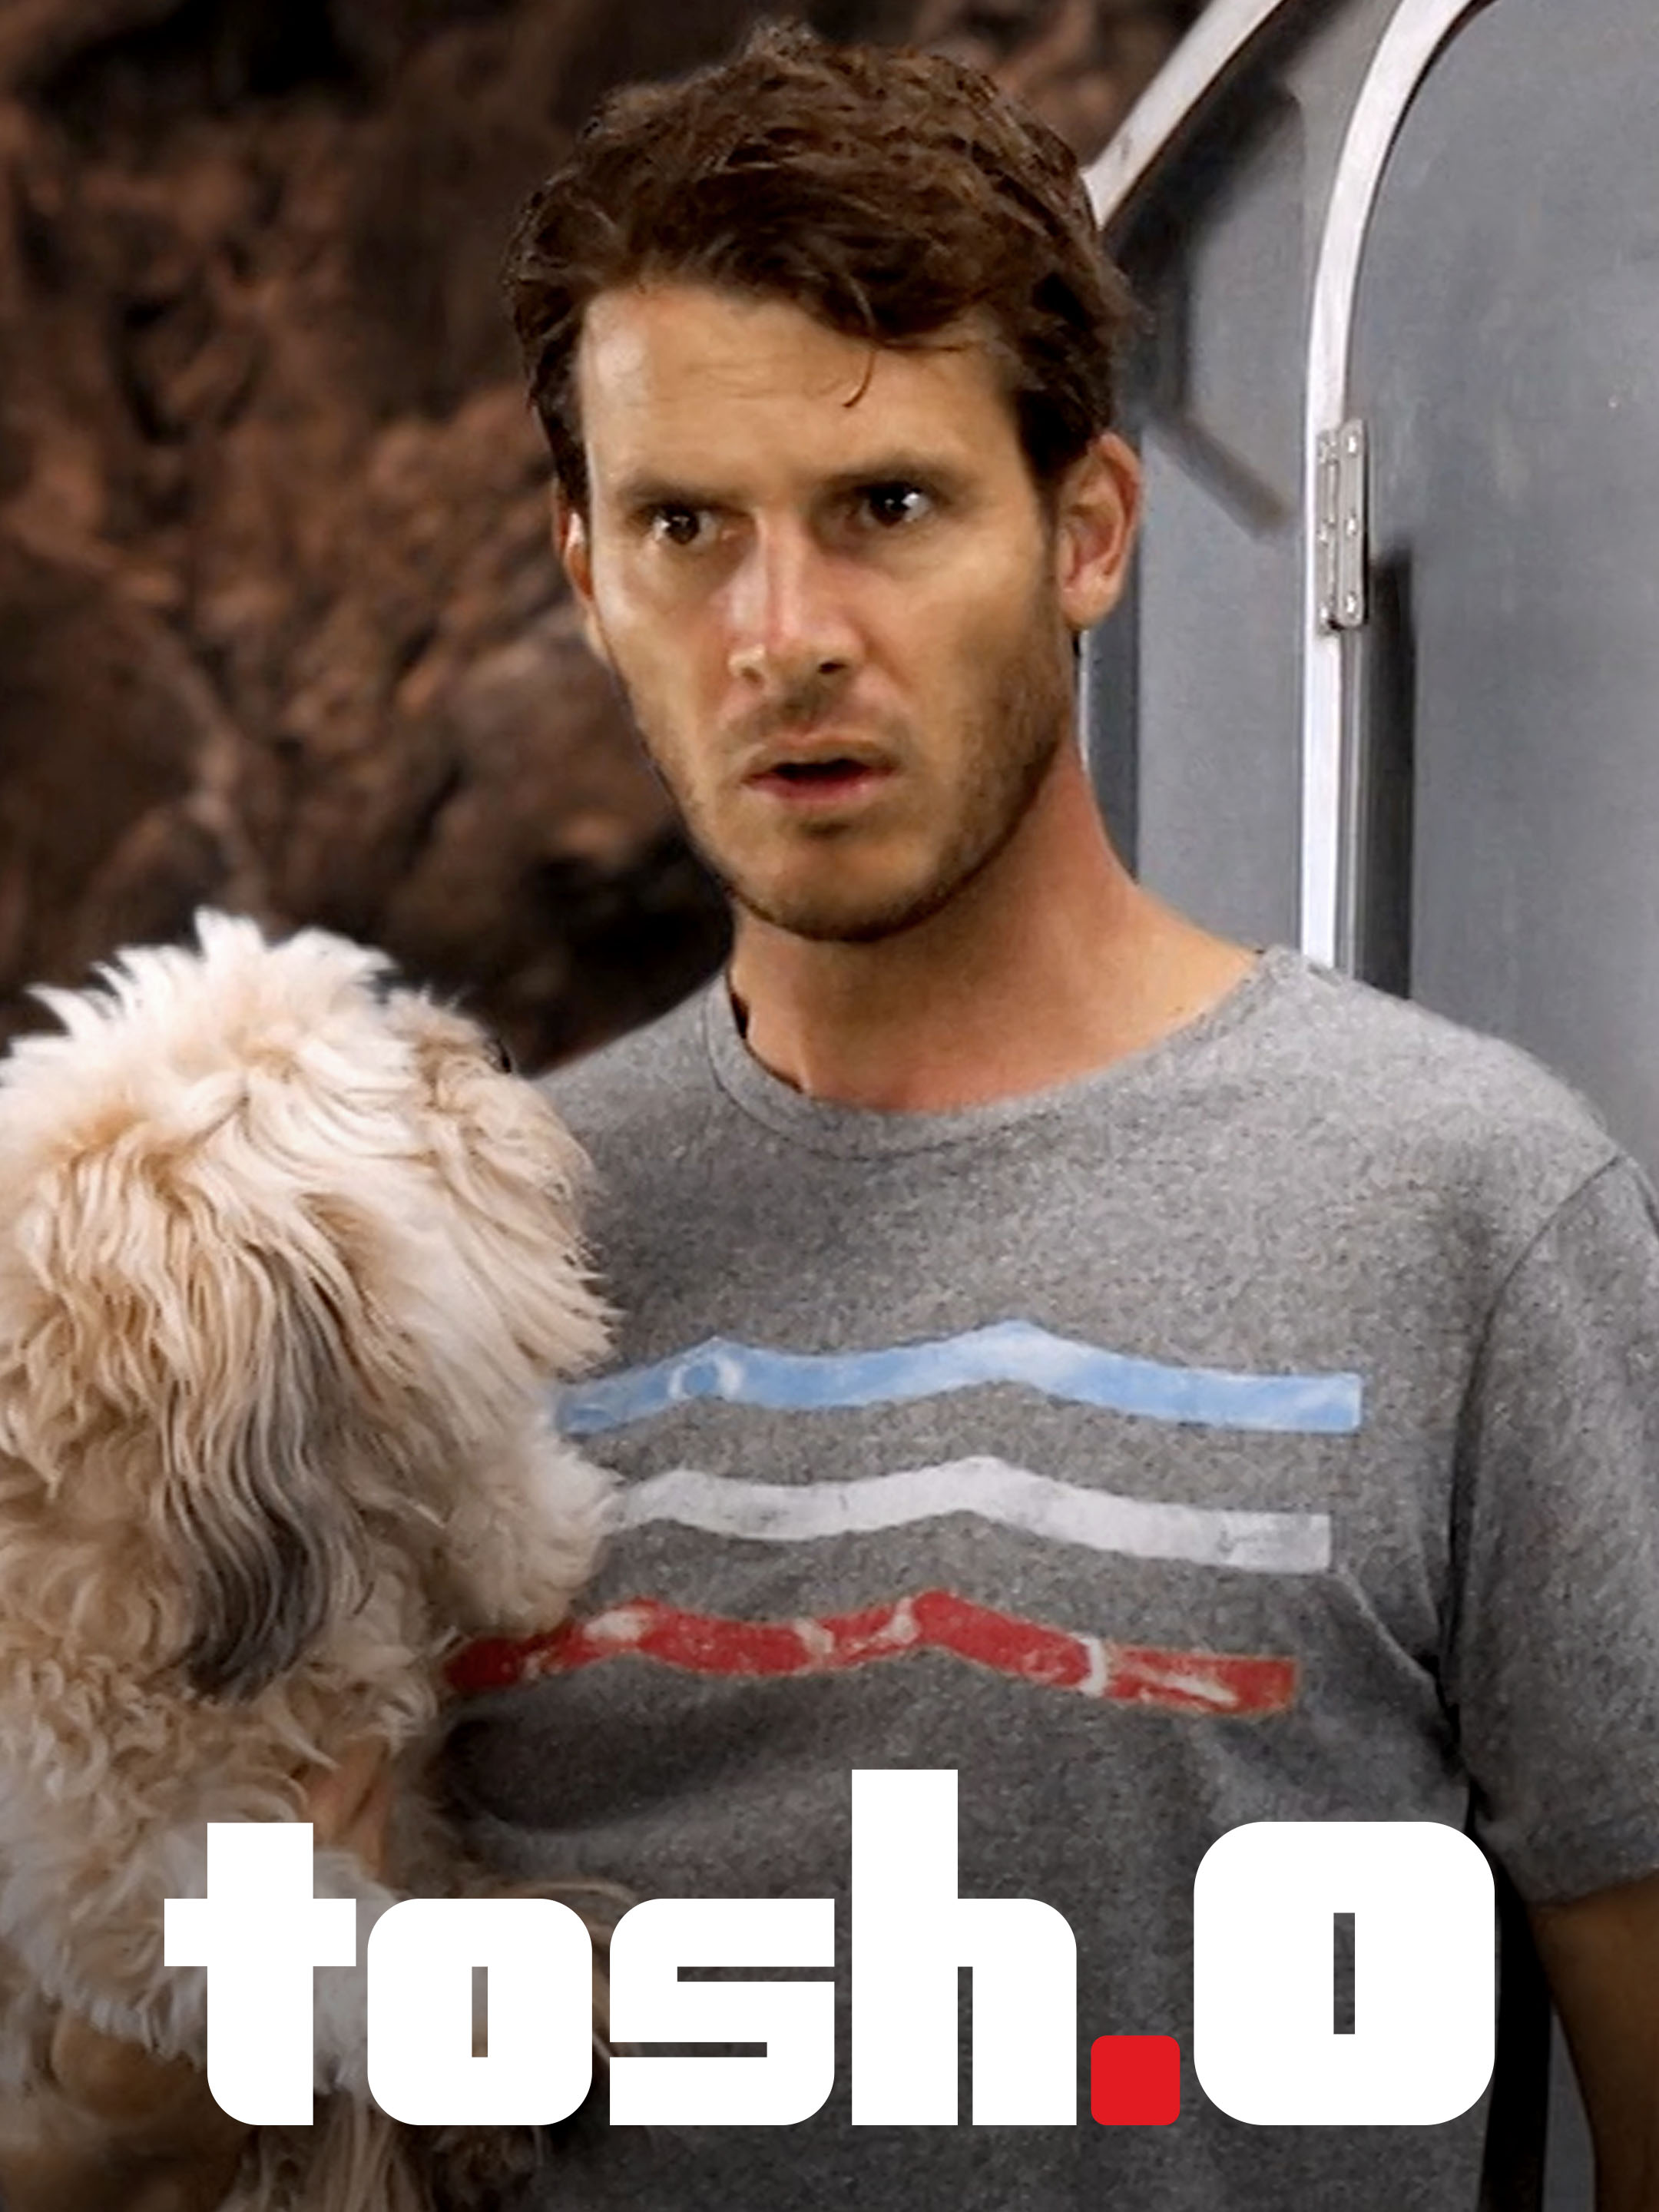 Find out where to watch Tosh.0 from Season 11 at TV Guide.